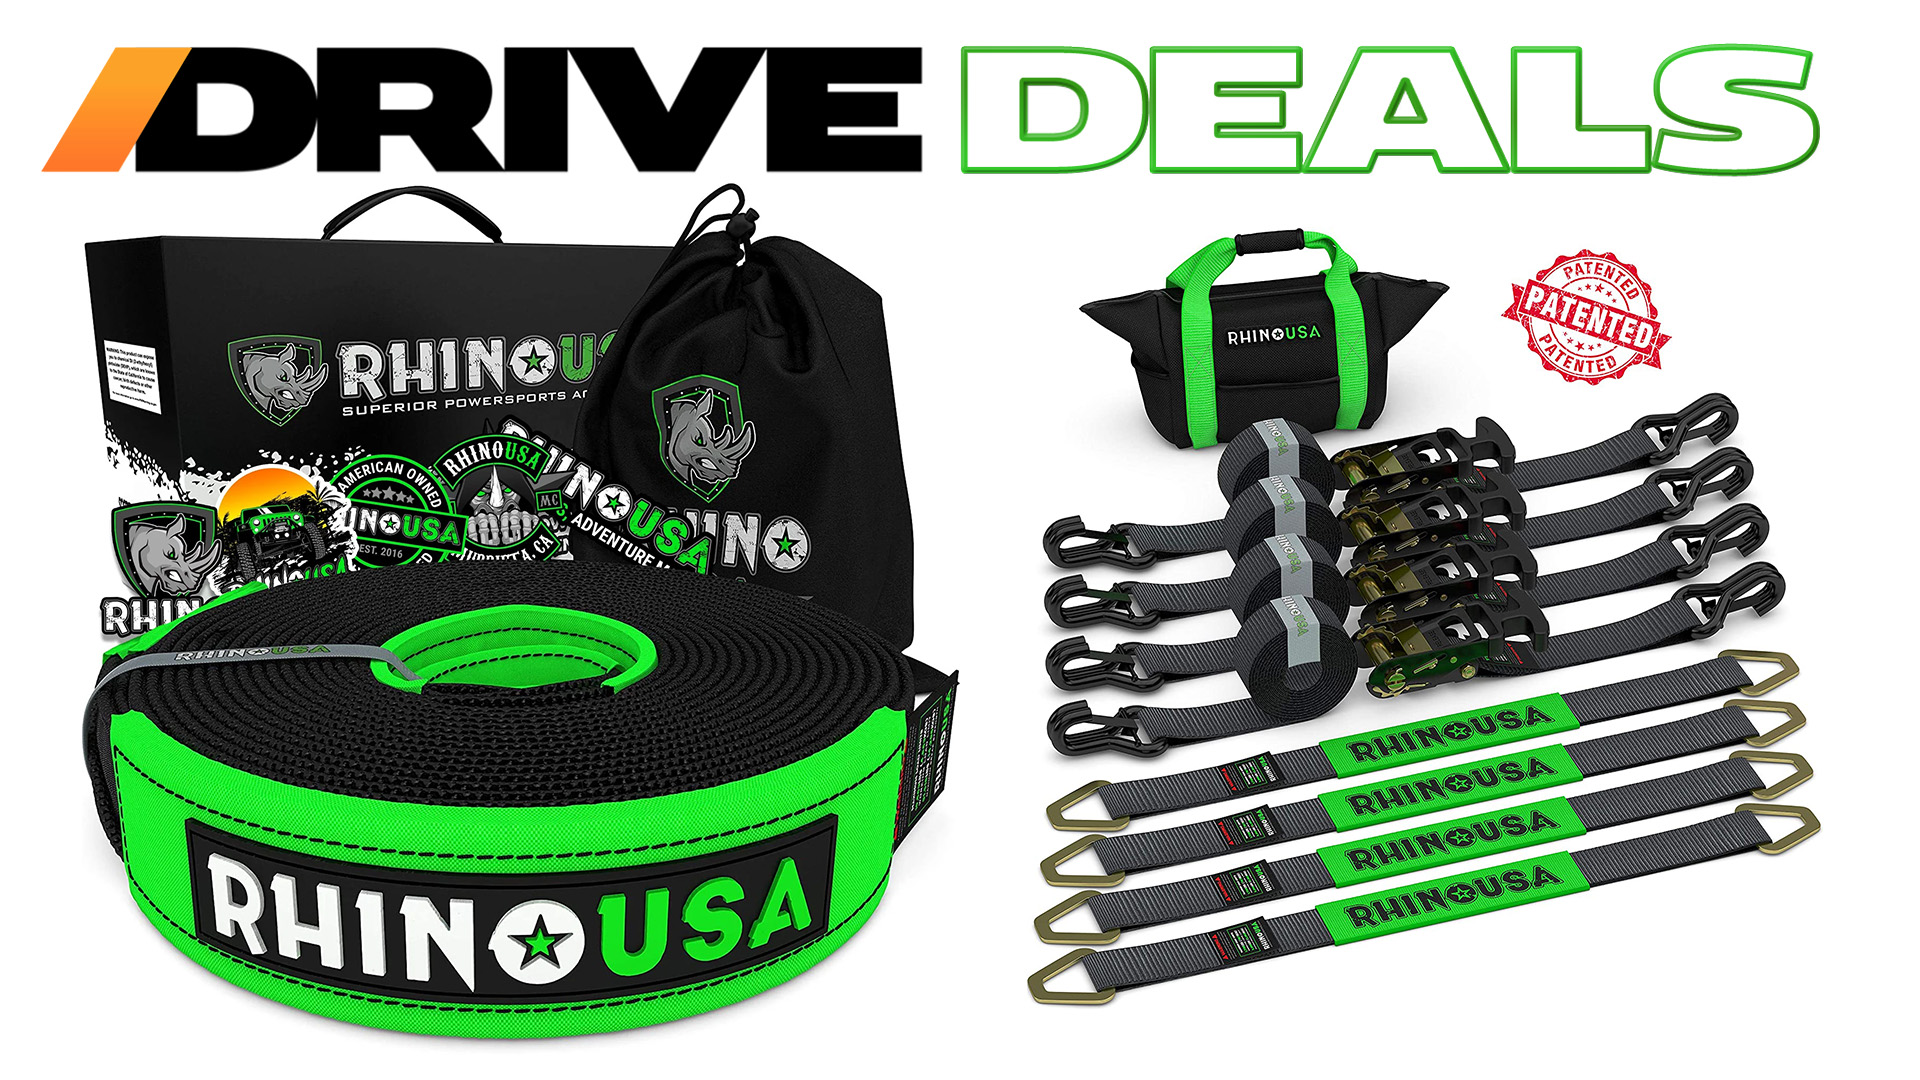 Save Big in More Ways Than One With Recovery Gear From RhinoUSA